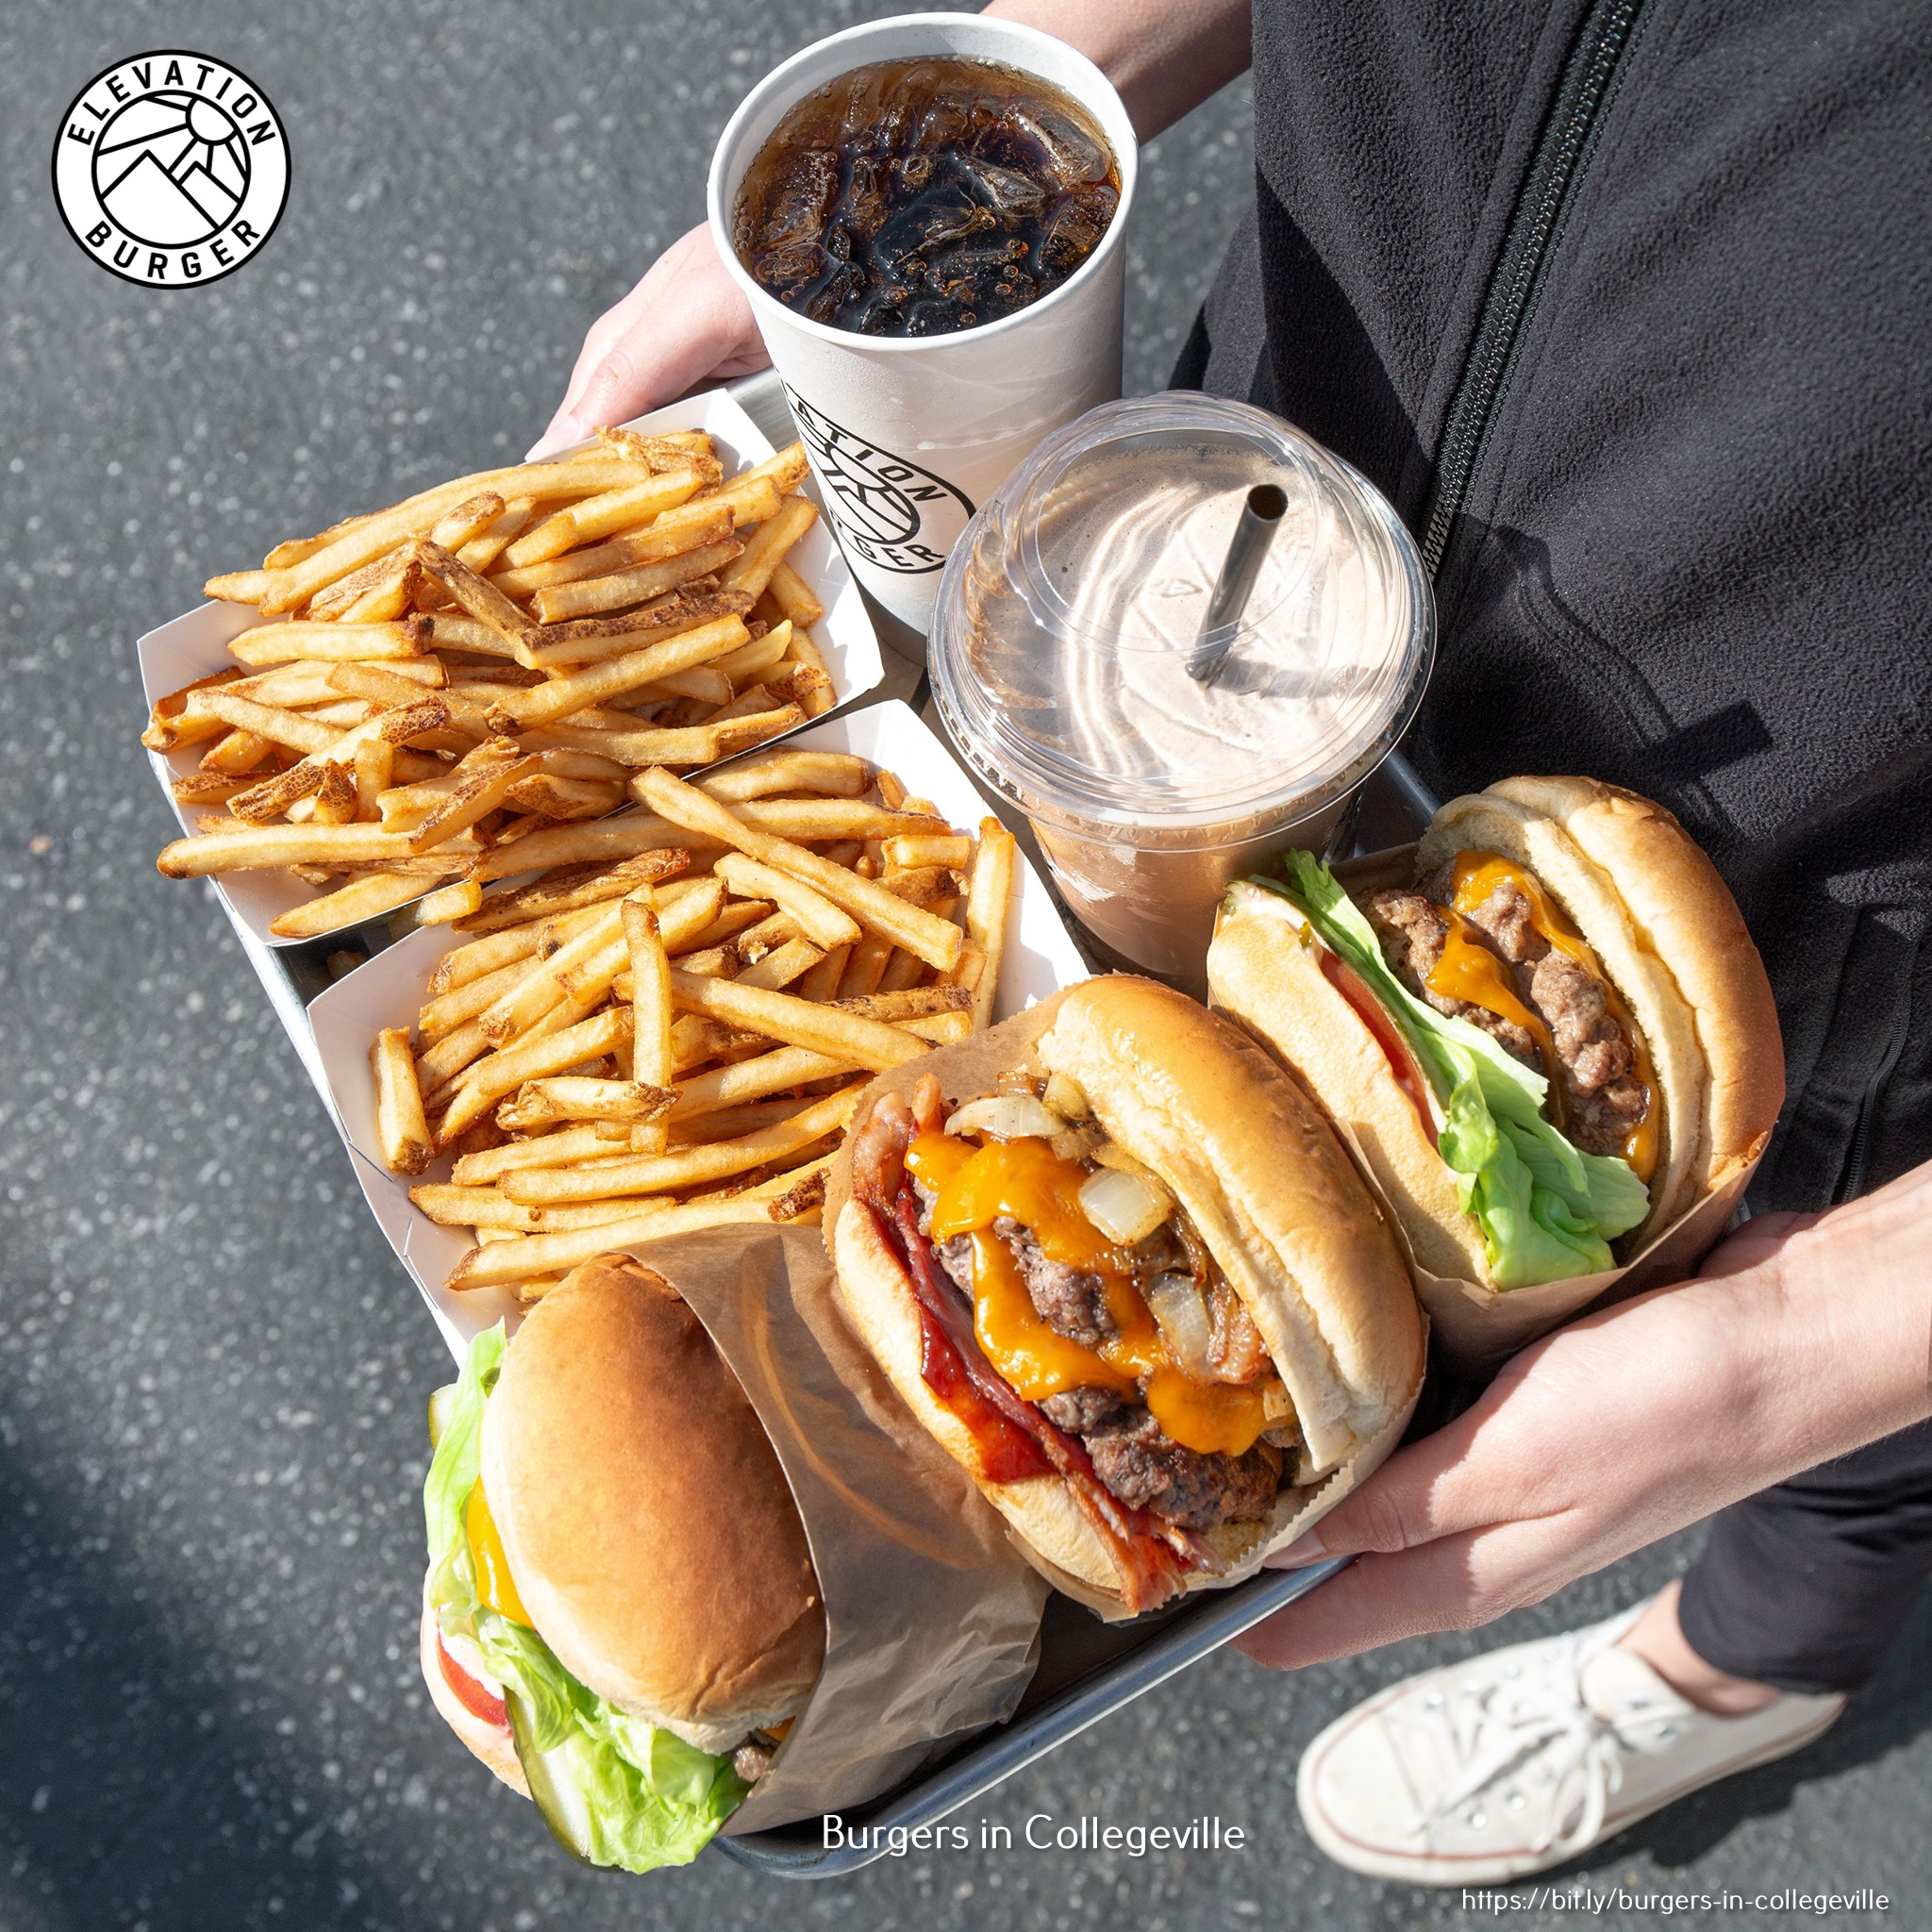 Elevation Burger provides its residents with top-notch burgers, shakes, and fresh-cut fries.